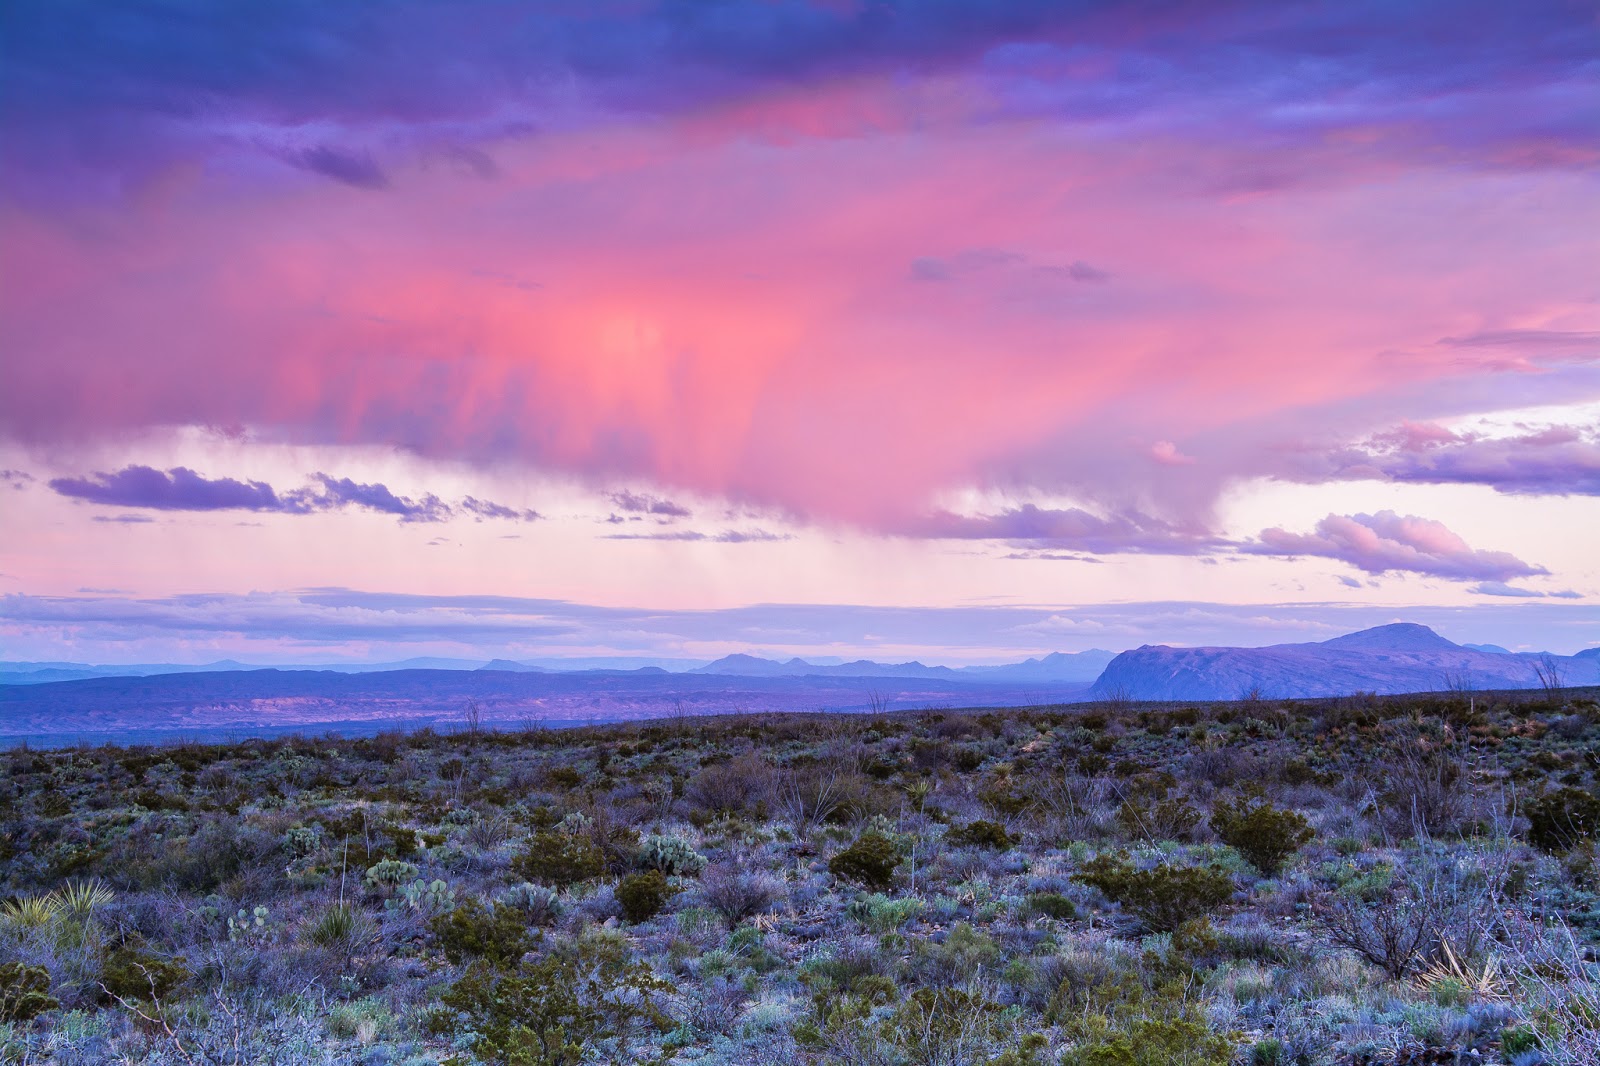 A Tree Falling: Big Bend National Park: Storms & Sunsets